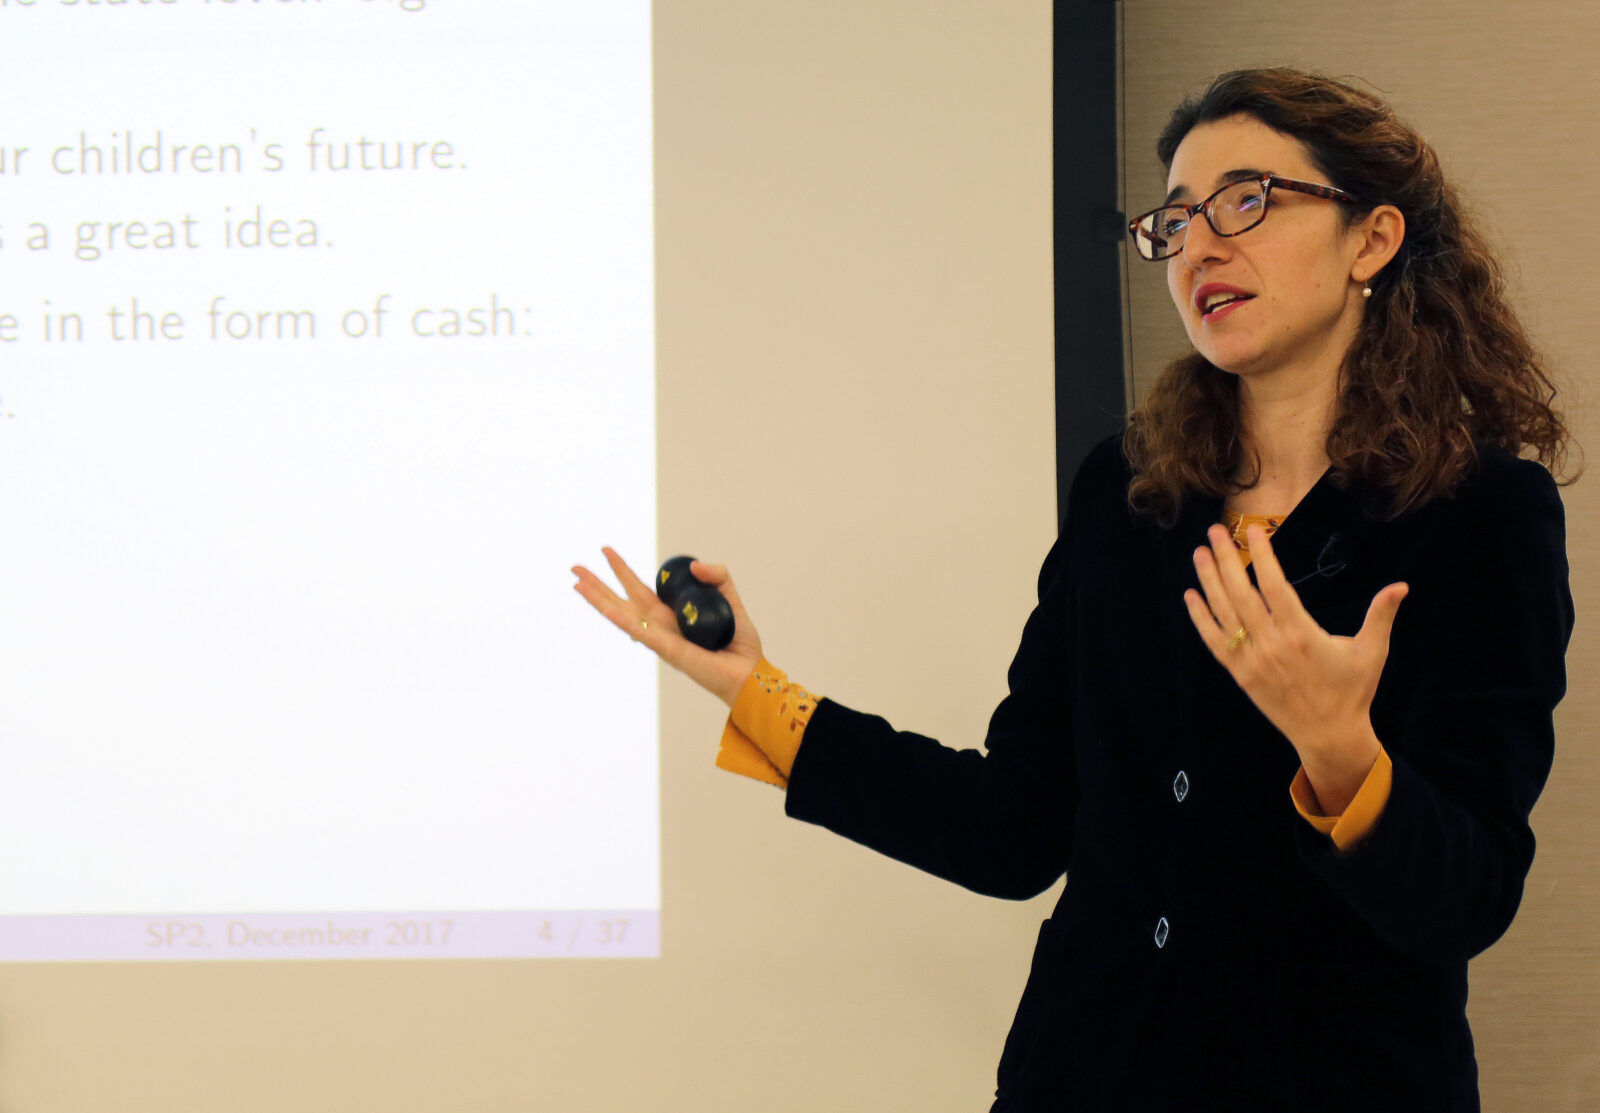 Dr. Ioana Marinescu speaking about universal basic income at an SP2 event.